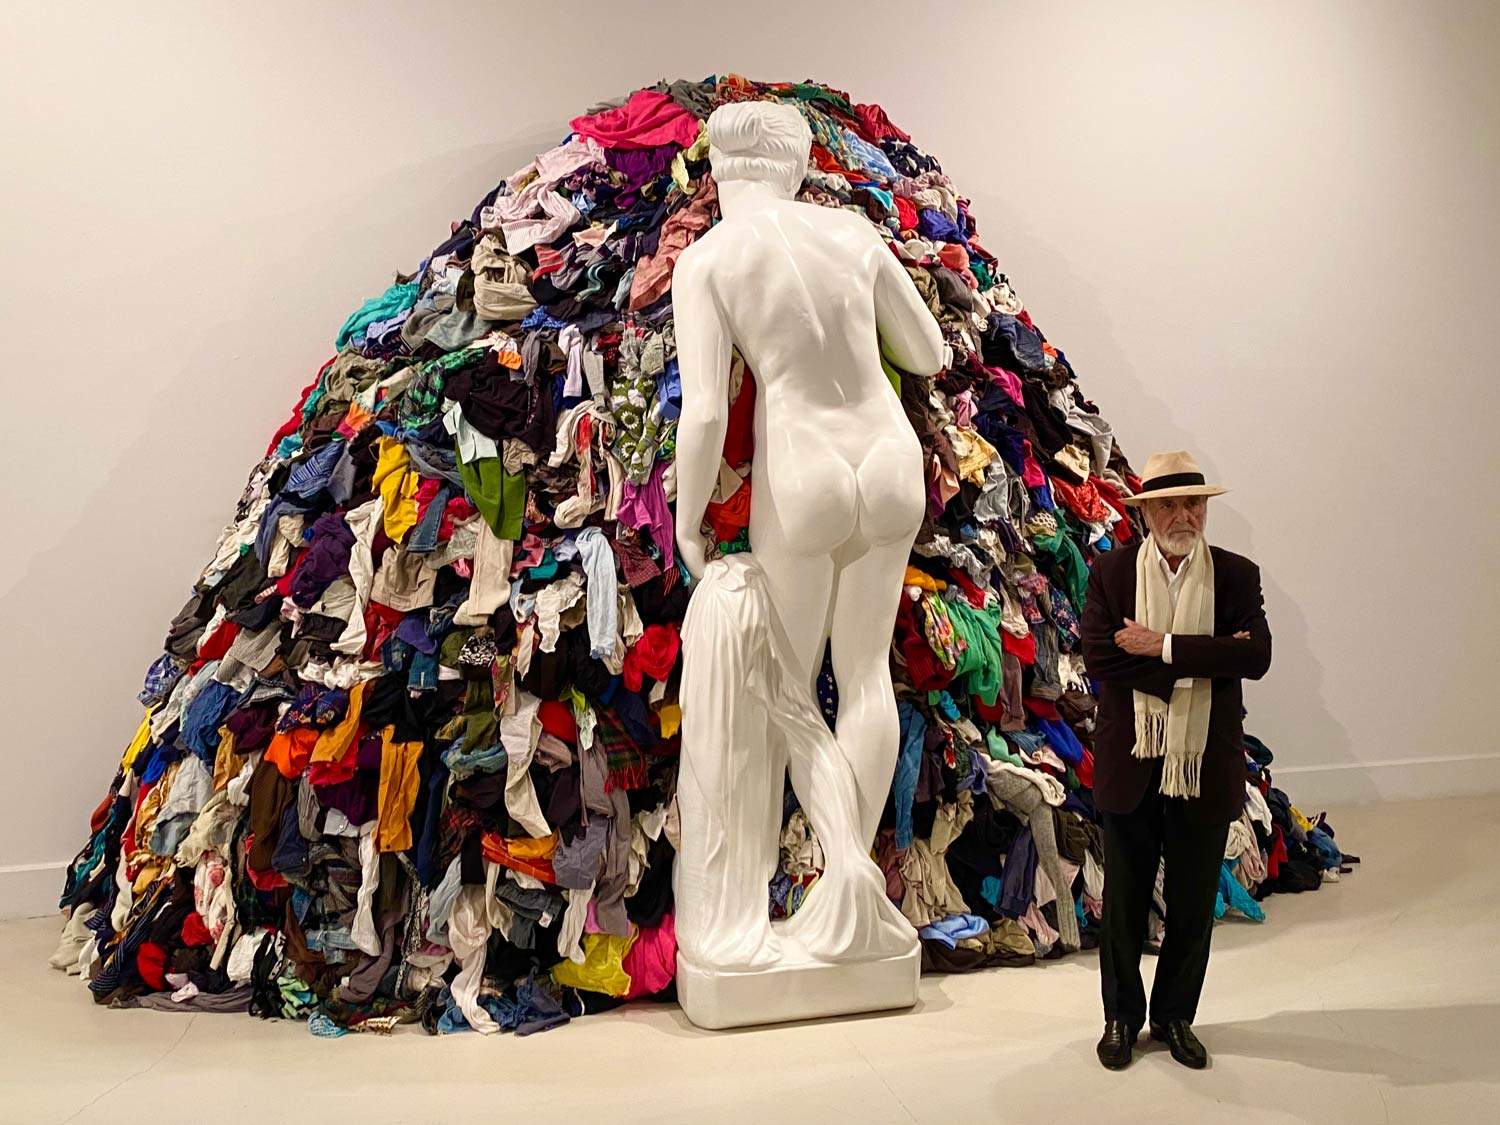 In Pistoia a major exhibition on Michelangelo Pistoletto with all major works